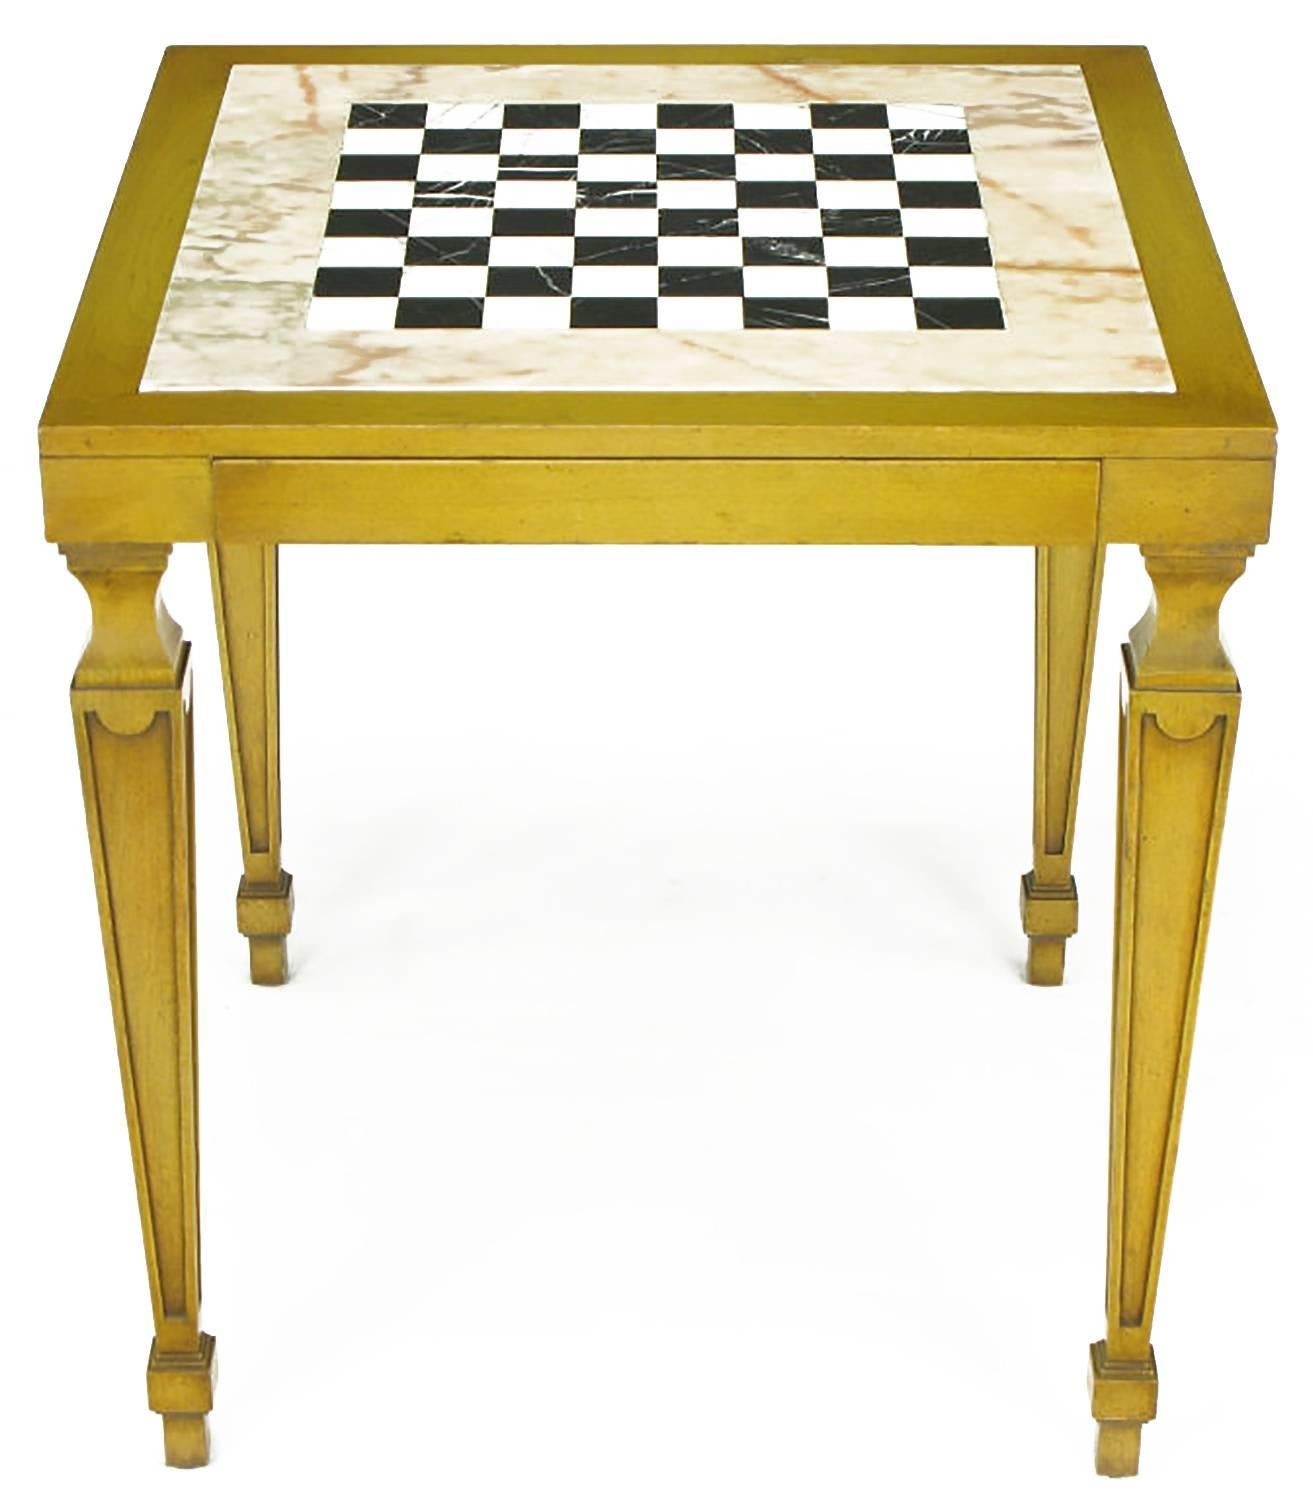 Bleached and glazed walnut French Regency style game table with a pair of side drawers. Uncommon marble inlaid top of creamy rouge veined marble surround with black and white Italian Carrara marble checker board inlaid center.
Marble game board 23